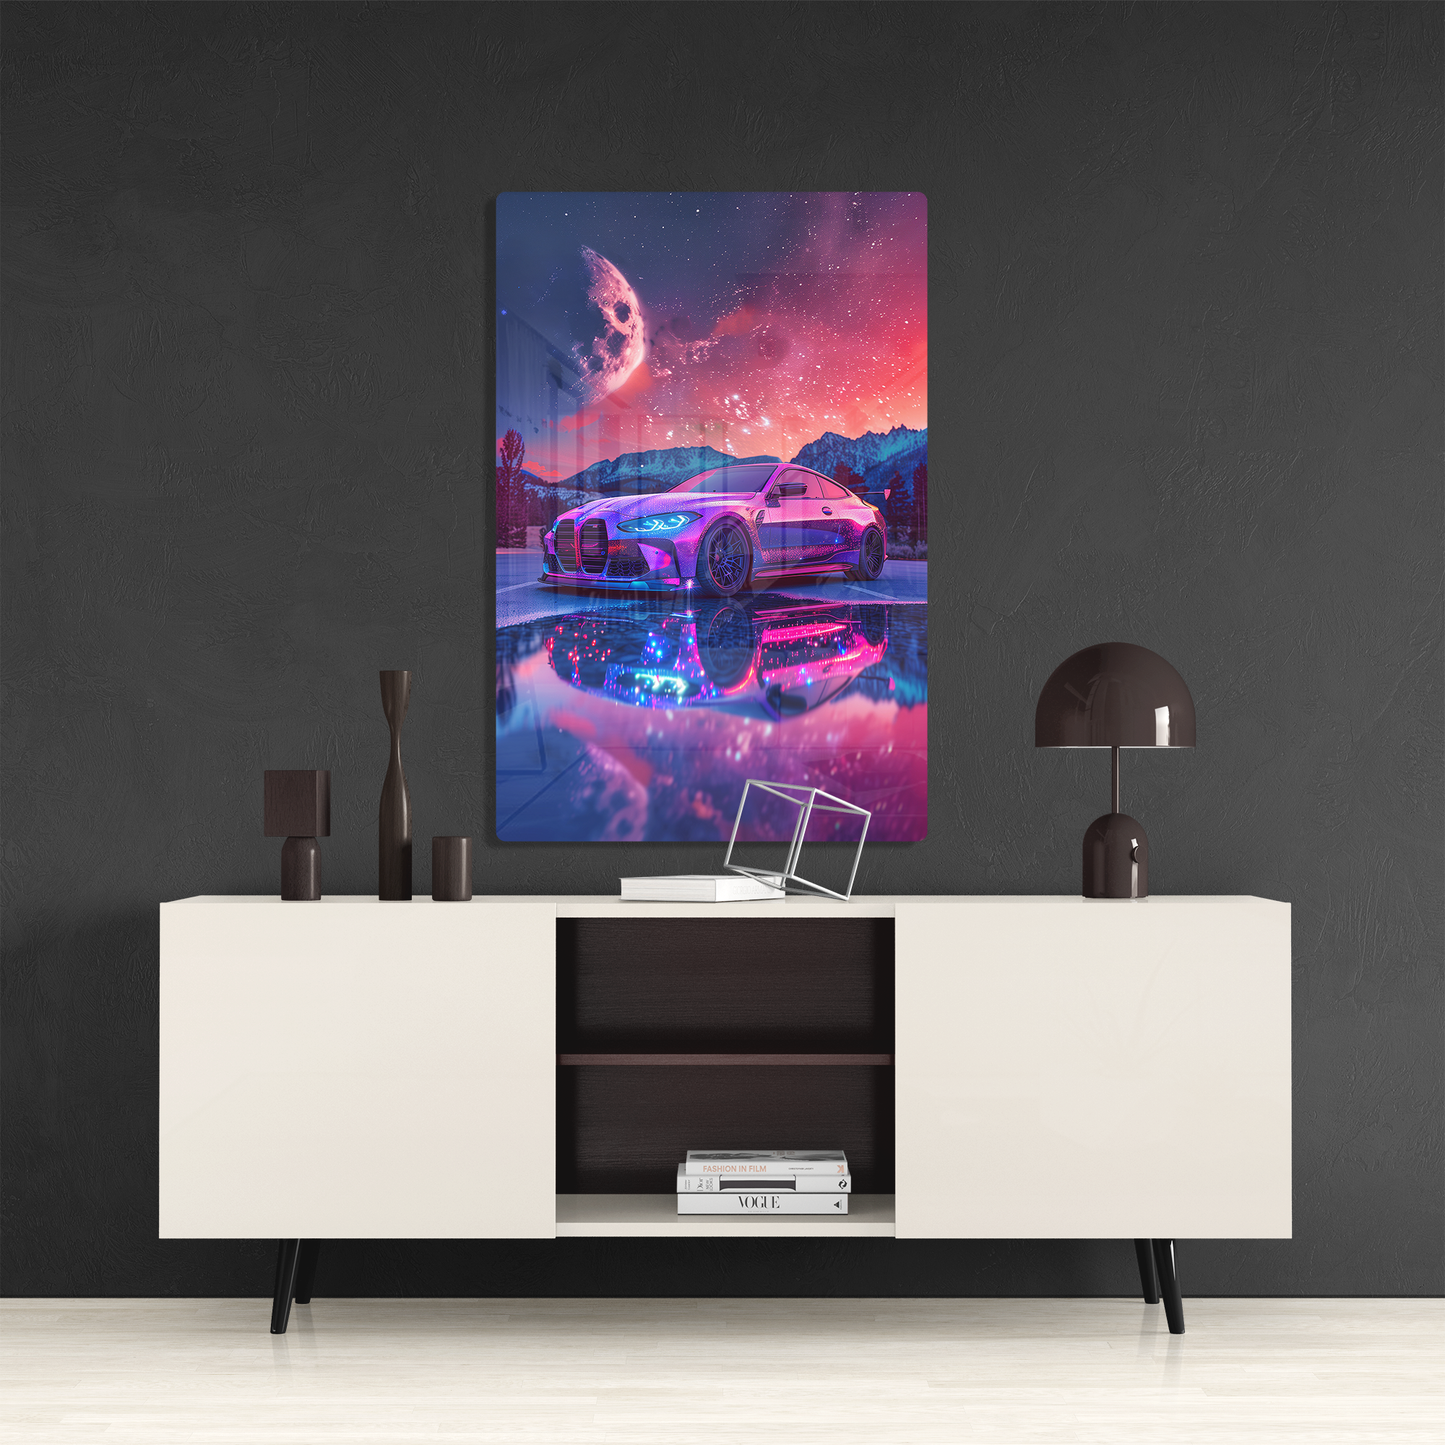 Galactic Grace (Acrylic)Step into the universe with 'Galactic Grace' on canvas from RimaGallery. Experience the cosmos in your home with vibrant, ethically crafted art. Free shipping in theRimaGallery